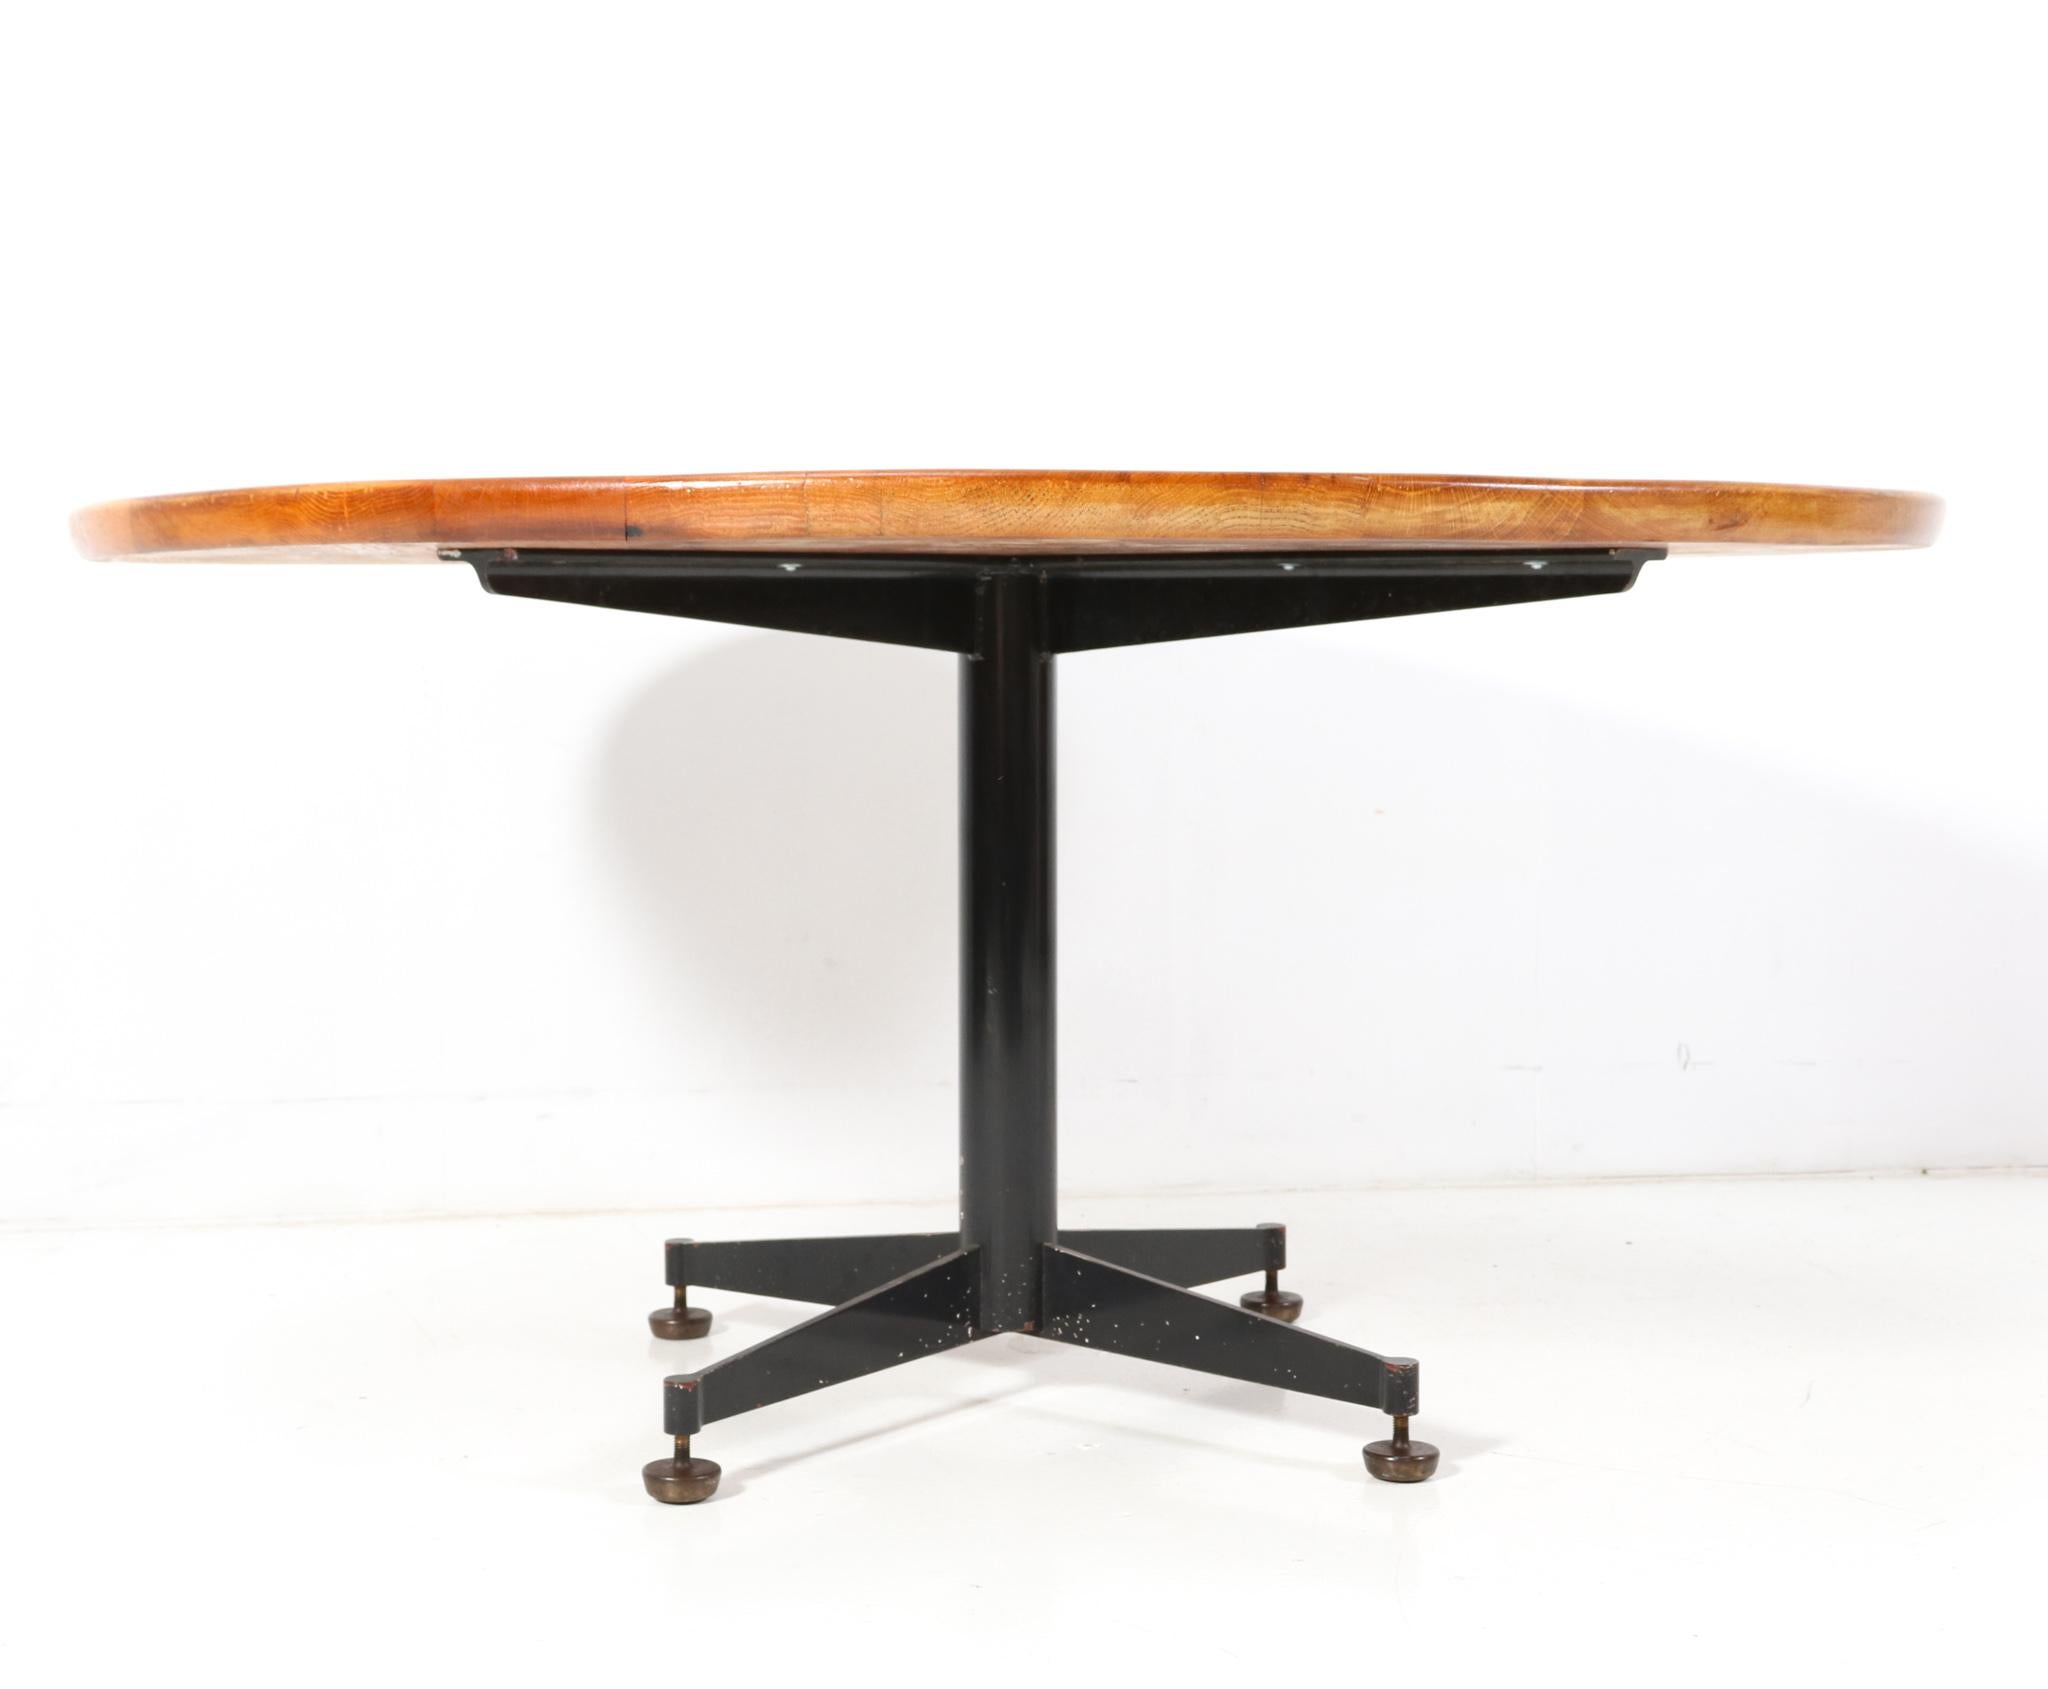 Lacquered Oak Mid-Century Modern Round Dining Room Table by Architect Bart van Kasteel For Sale